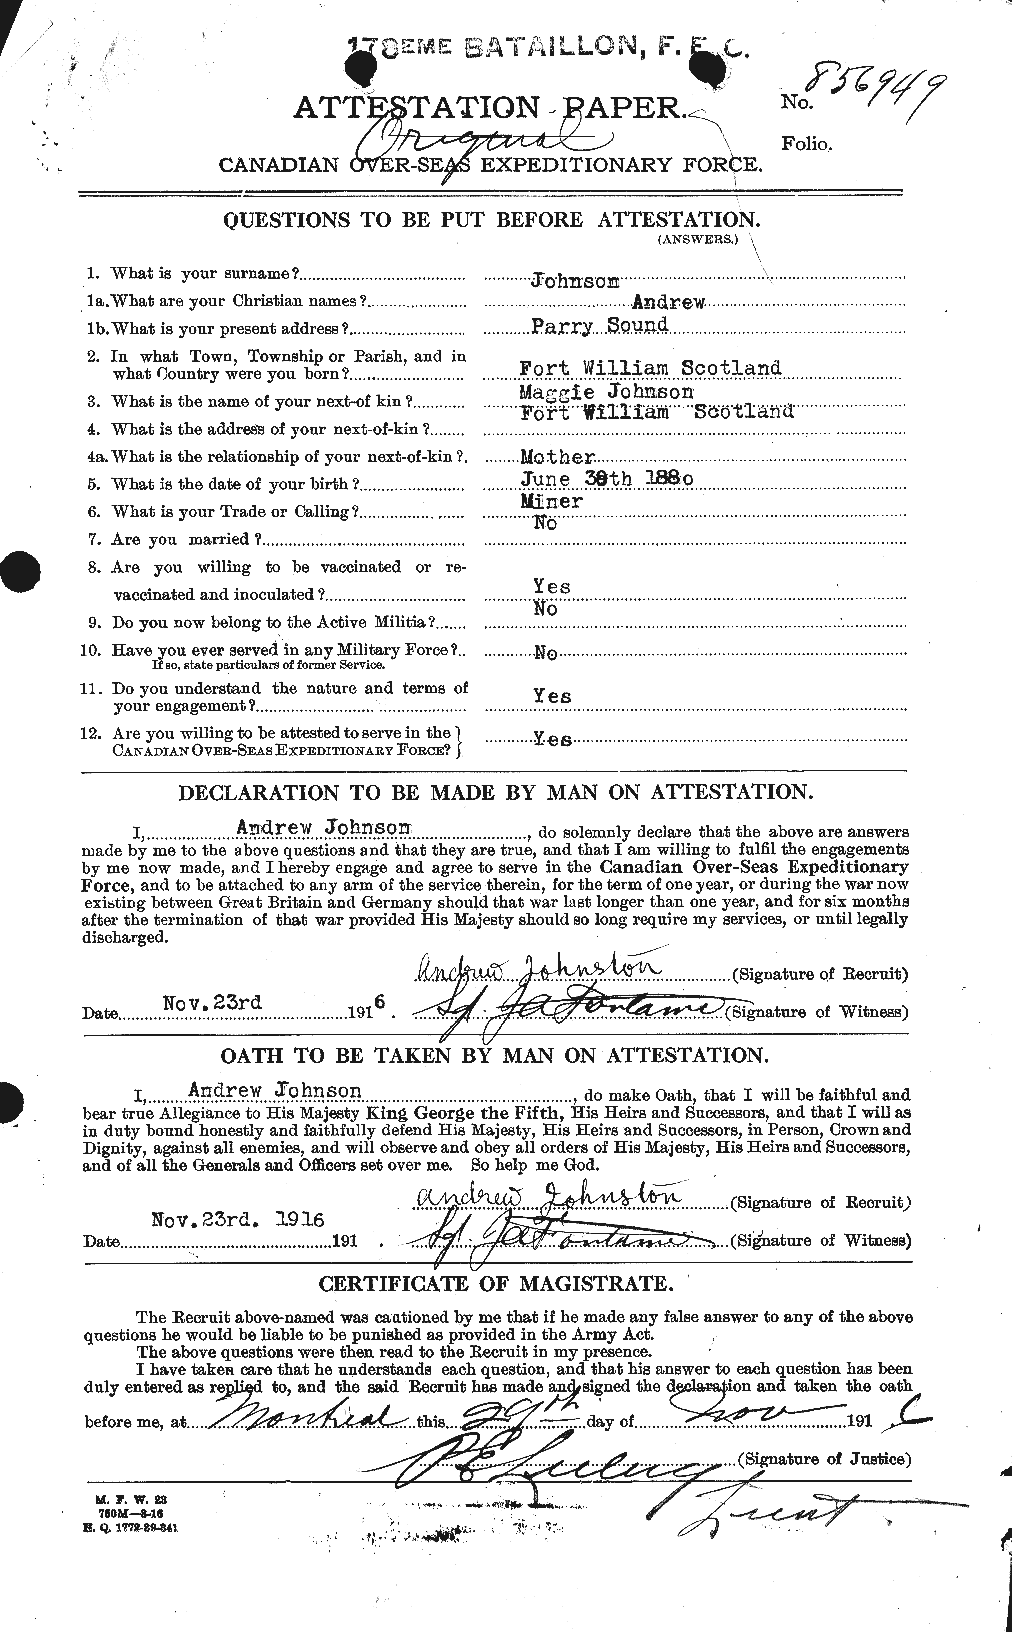 Personnel Records of the First World War - CEF 421206a